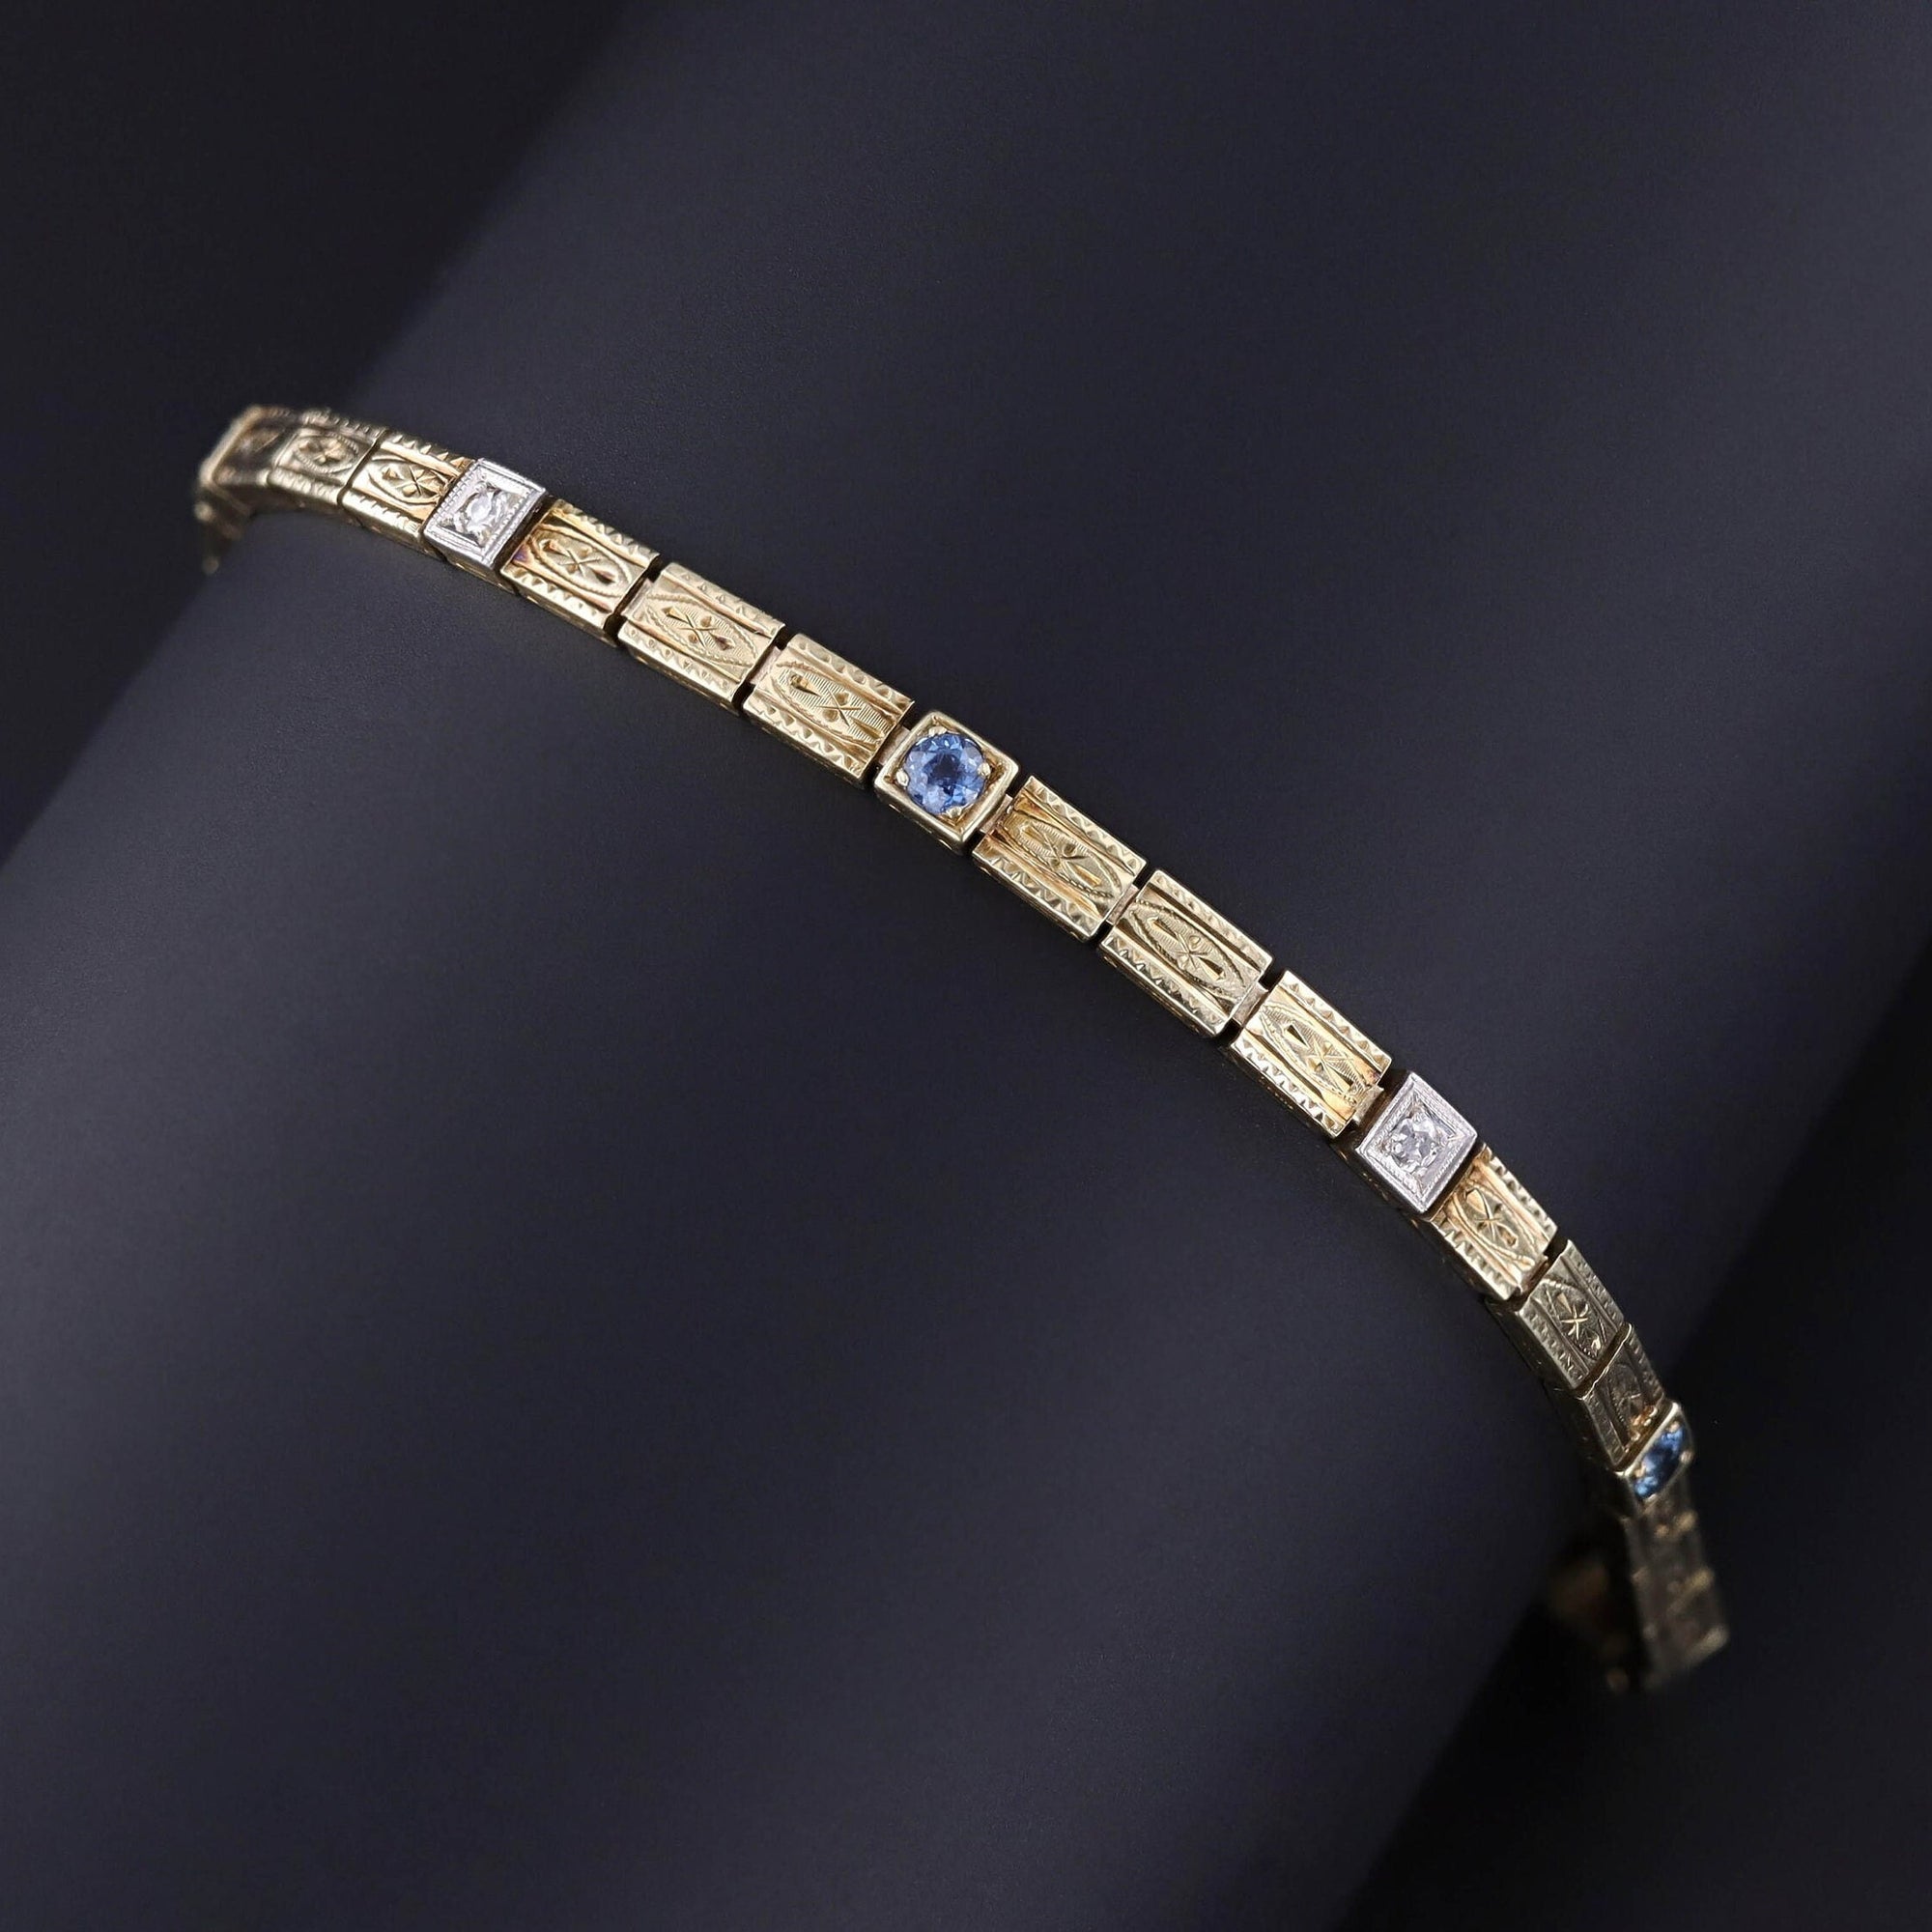 An Art Deco sapphire and diamond line bracelet adorned with sapphires and old European cut diamonds. The bracelet measures 7.8 inches and is in excellent condition.